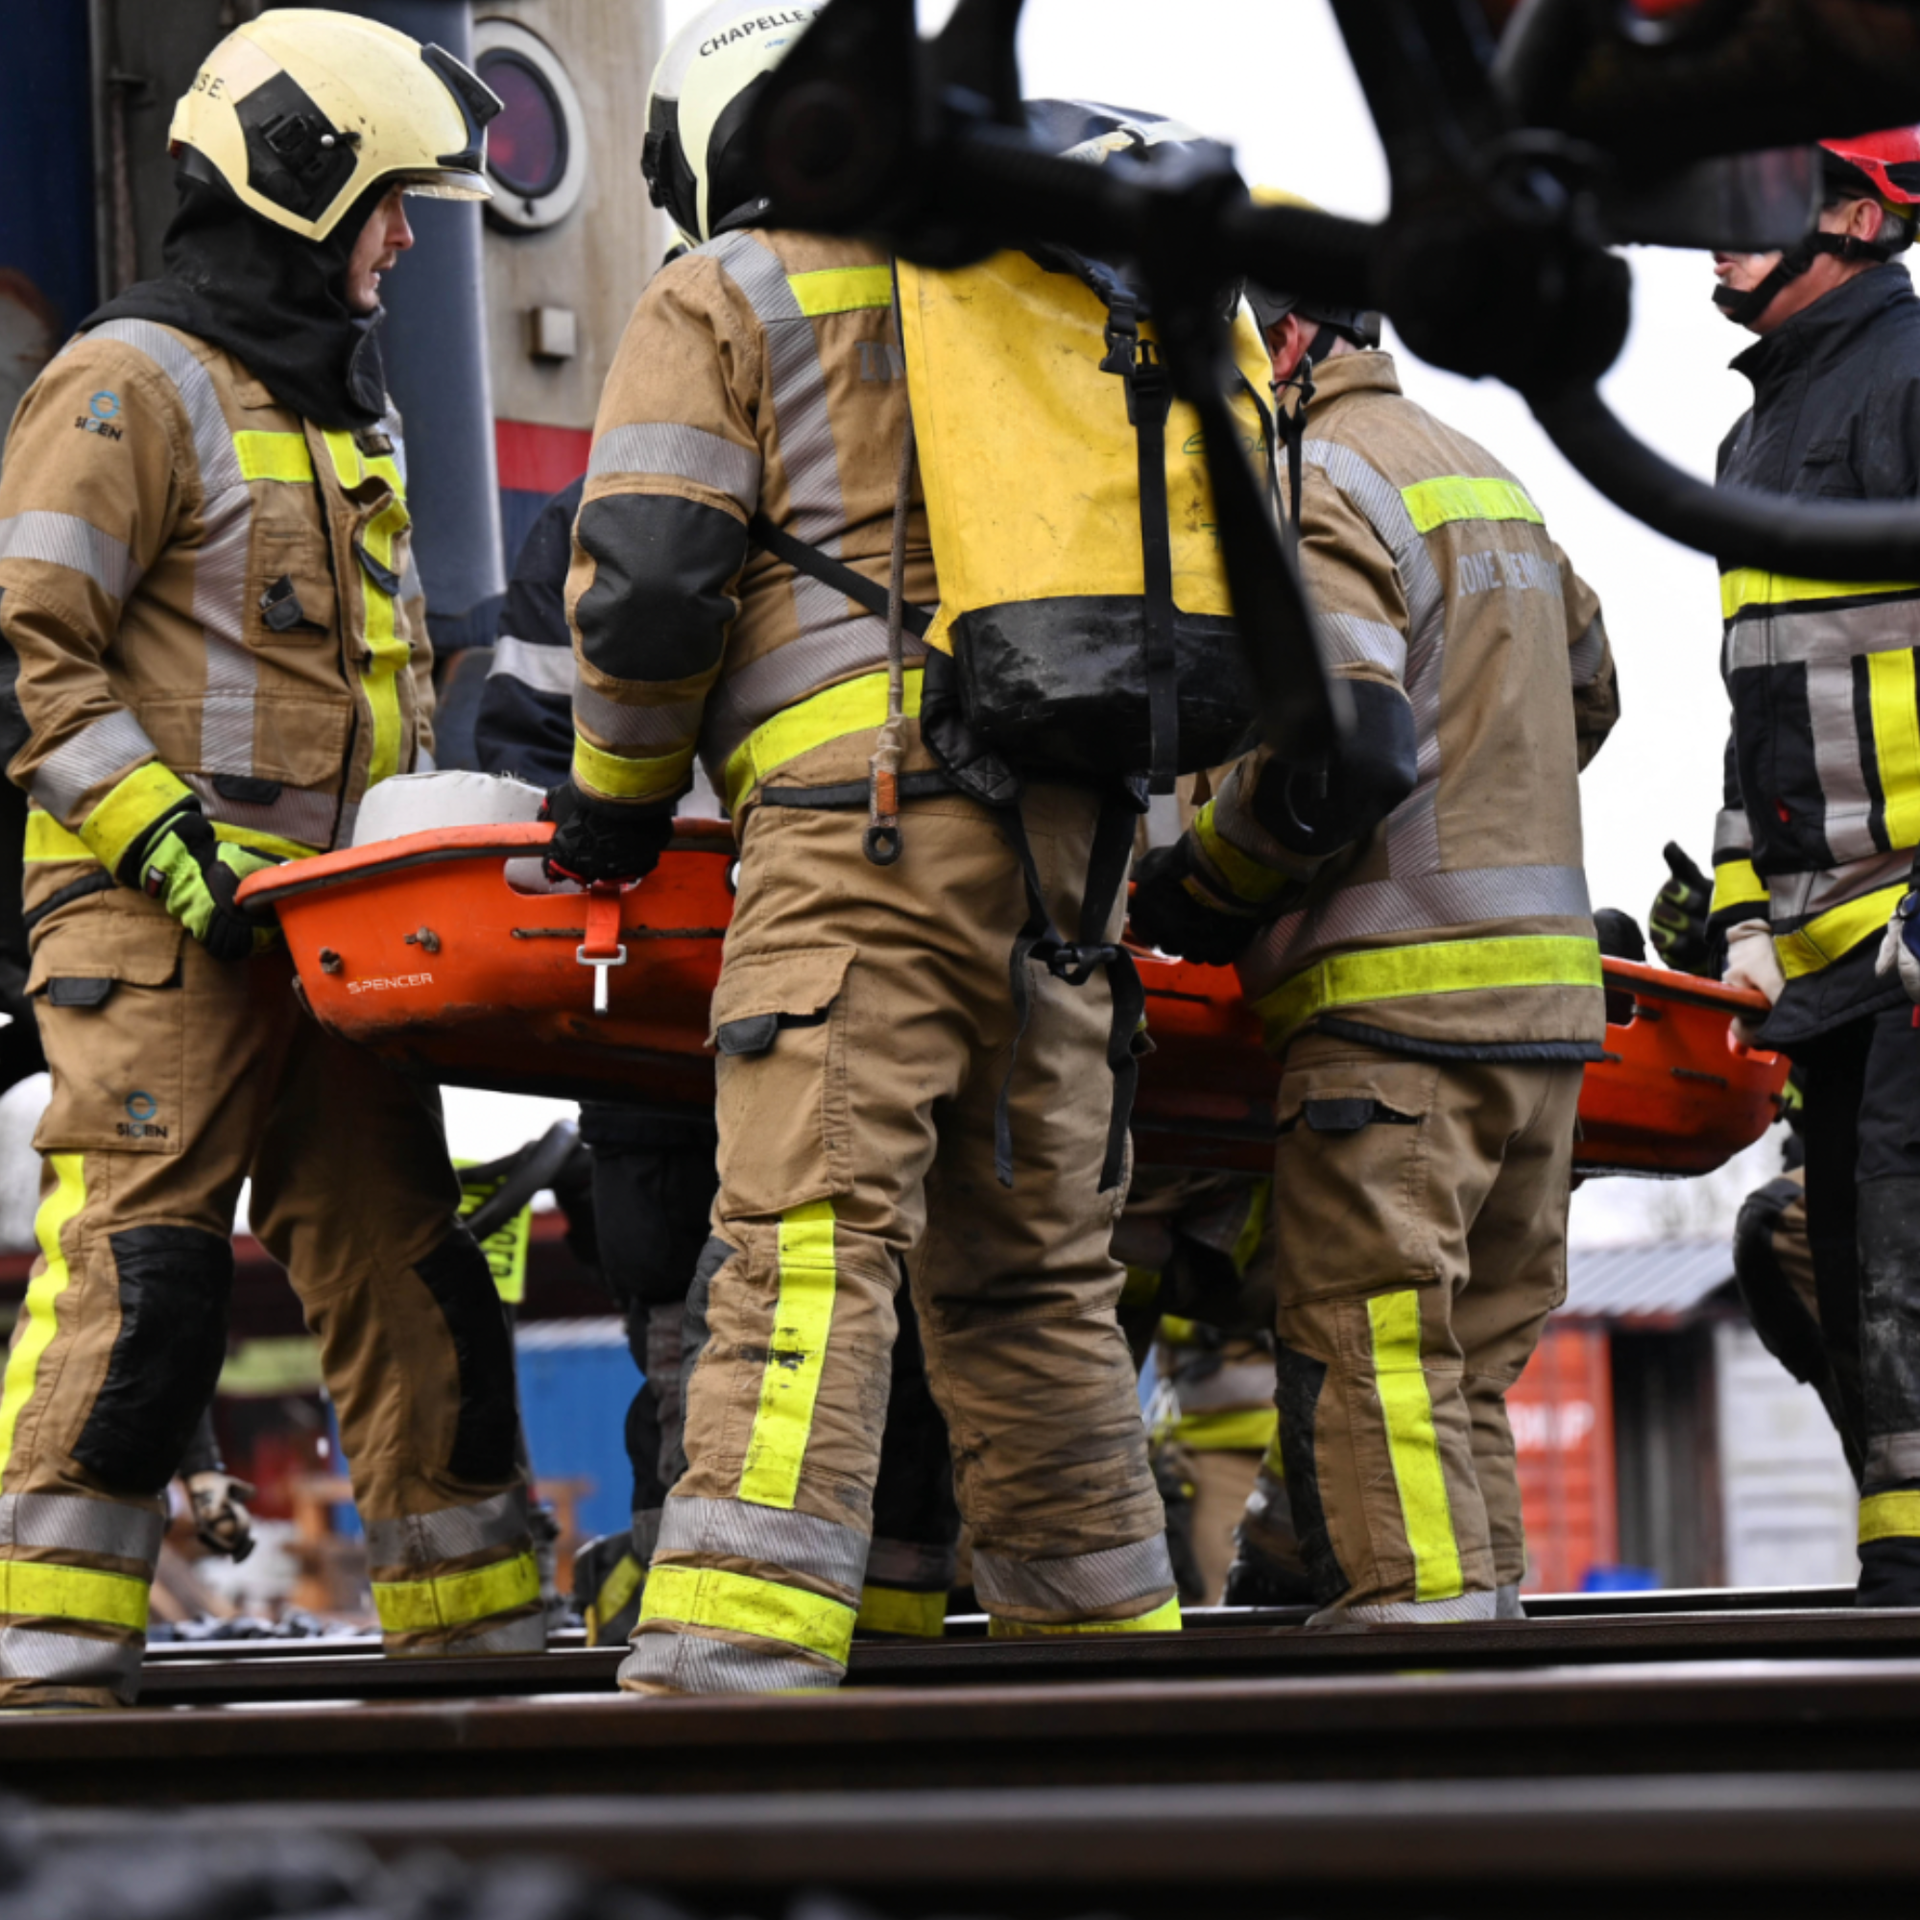 Firefighters carrying a basket stretcher with a casualty